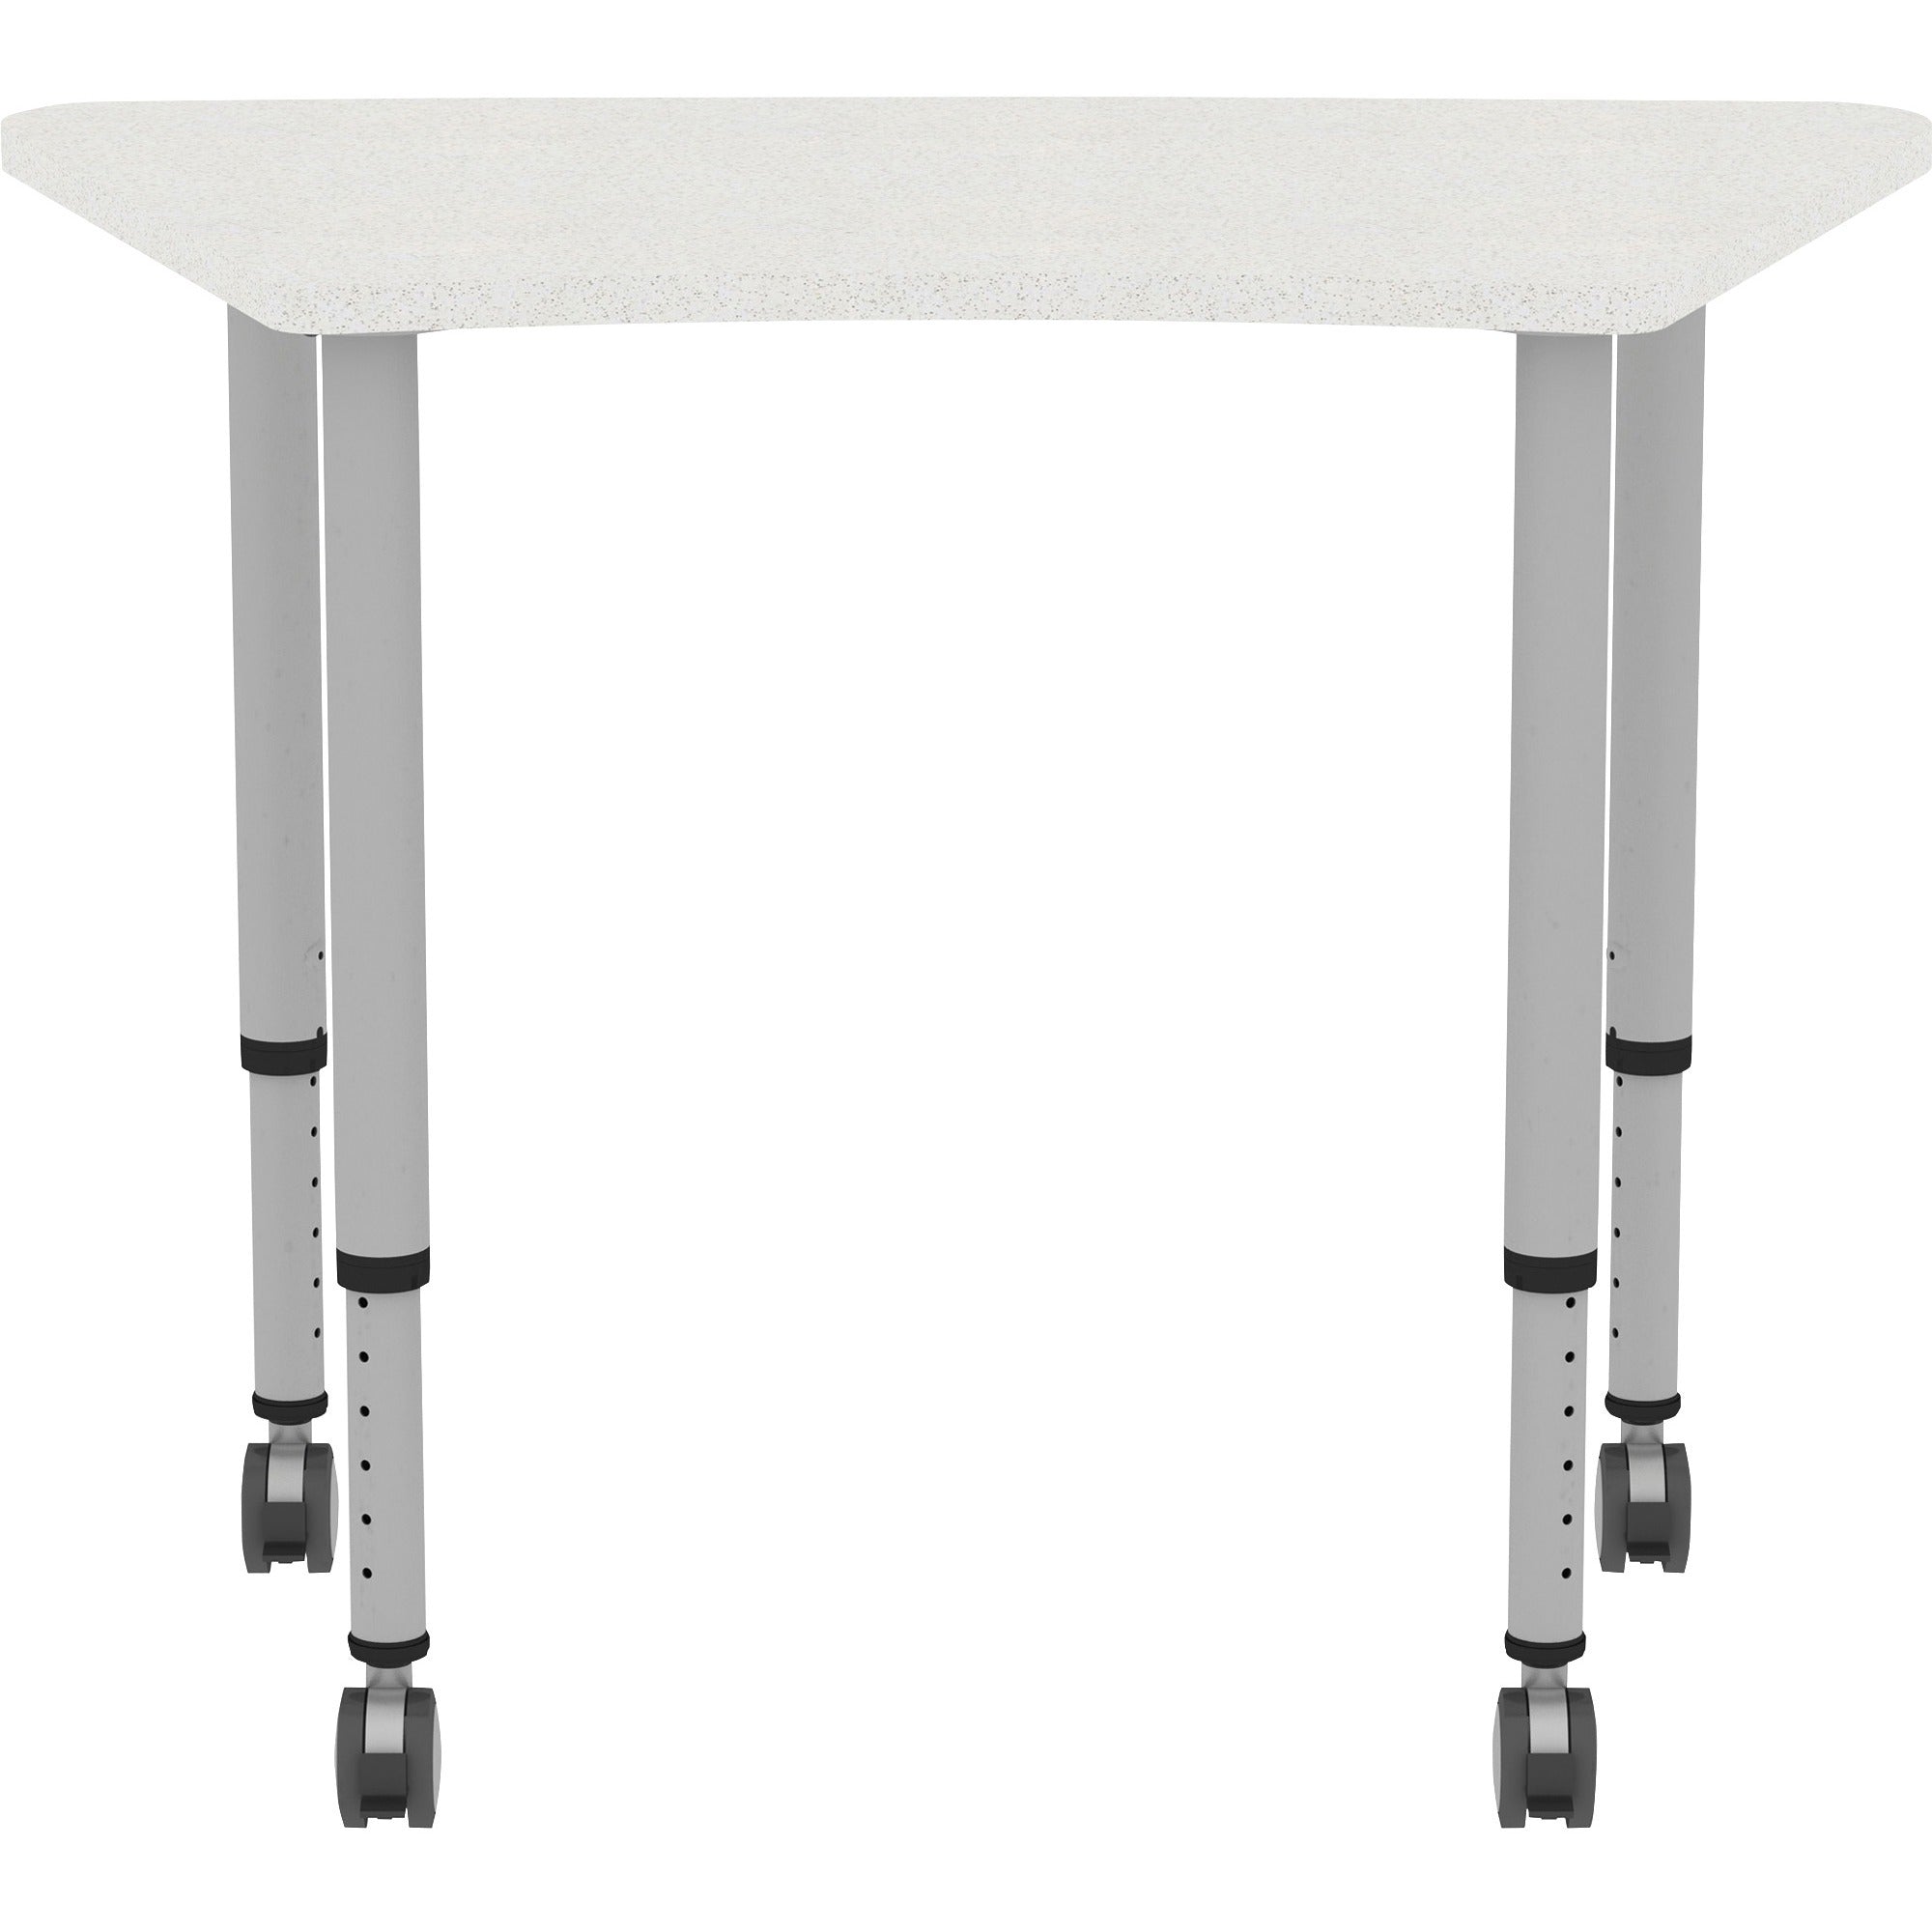 lorell-attune-height-adjustable-multipurpose-curved-table-for-table-toptrapezoid-top-adjustable-height-2662-to-3362-adjustment-x-60-table-top-width-x-2362-table-top-depth-3362-height-assembly-required-laminated-gray-laminate_llr69583 - 3